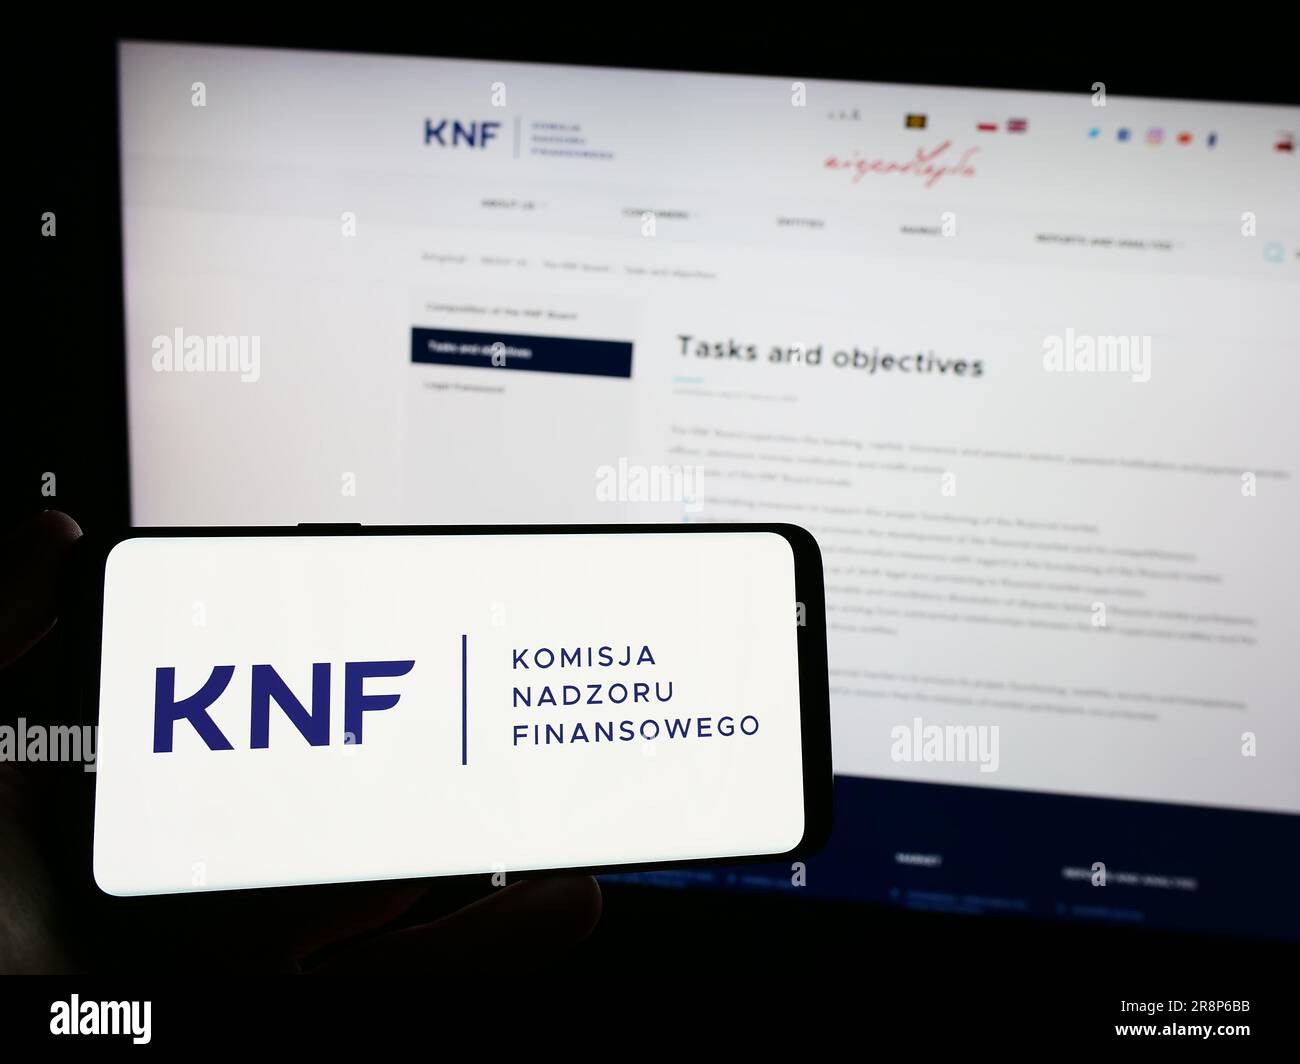 Person holding smartphone with logo of authority Komisja Nadzoru Finansowego (KNF) on screen in front of website. Focus on phone display. Stock Photo